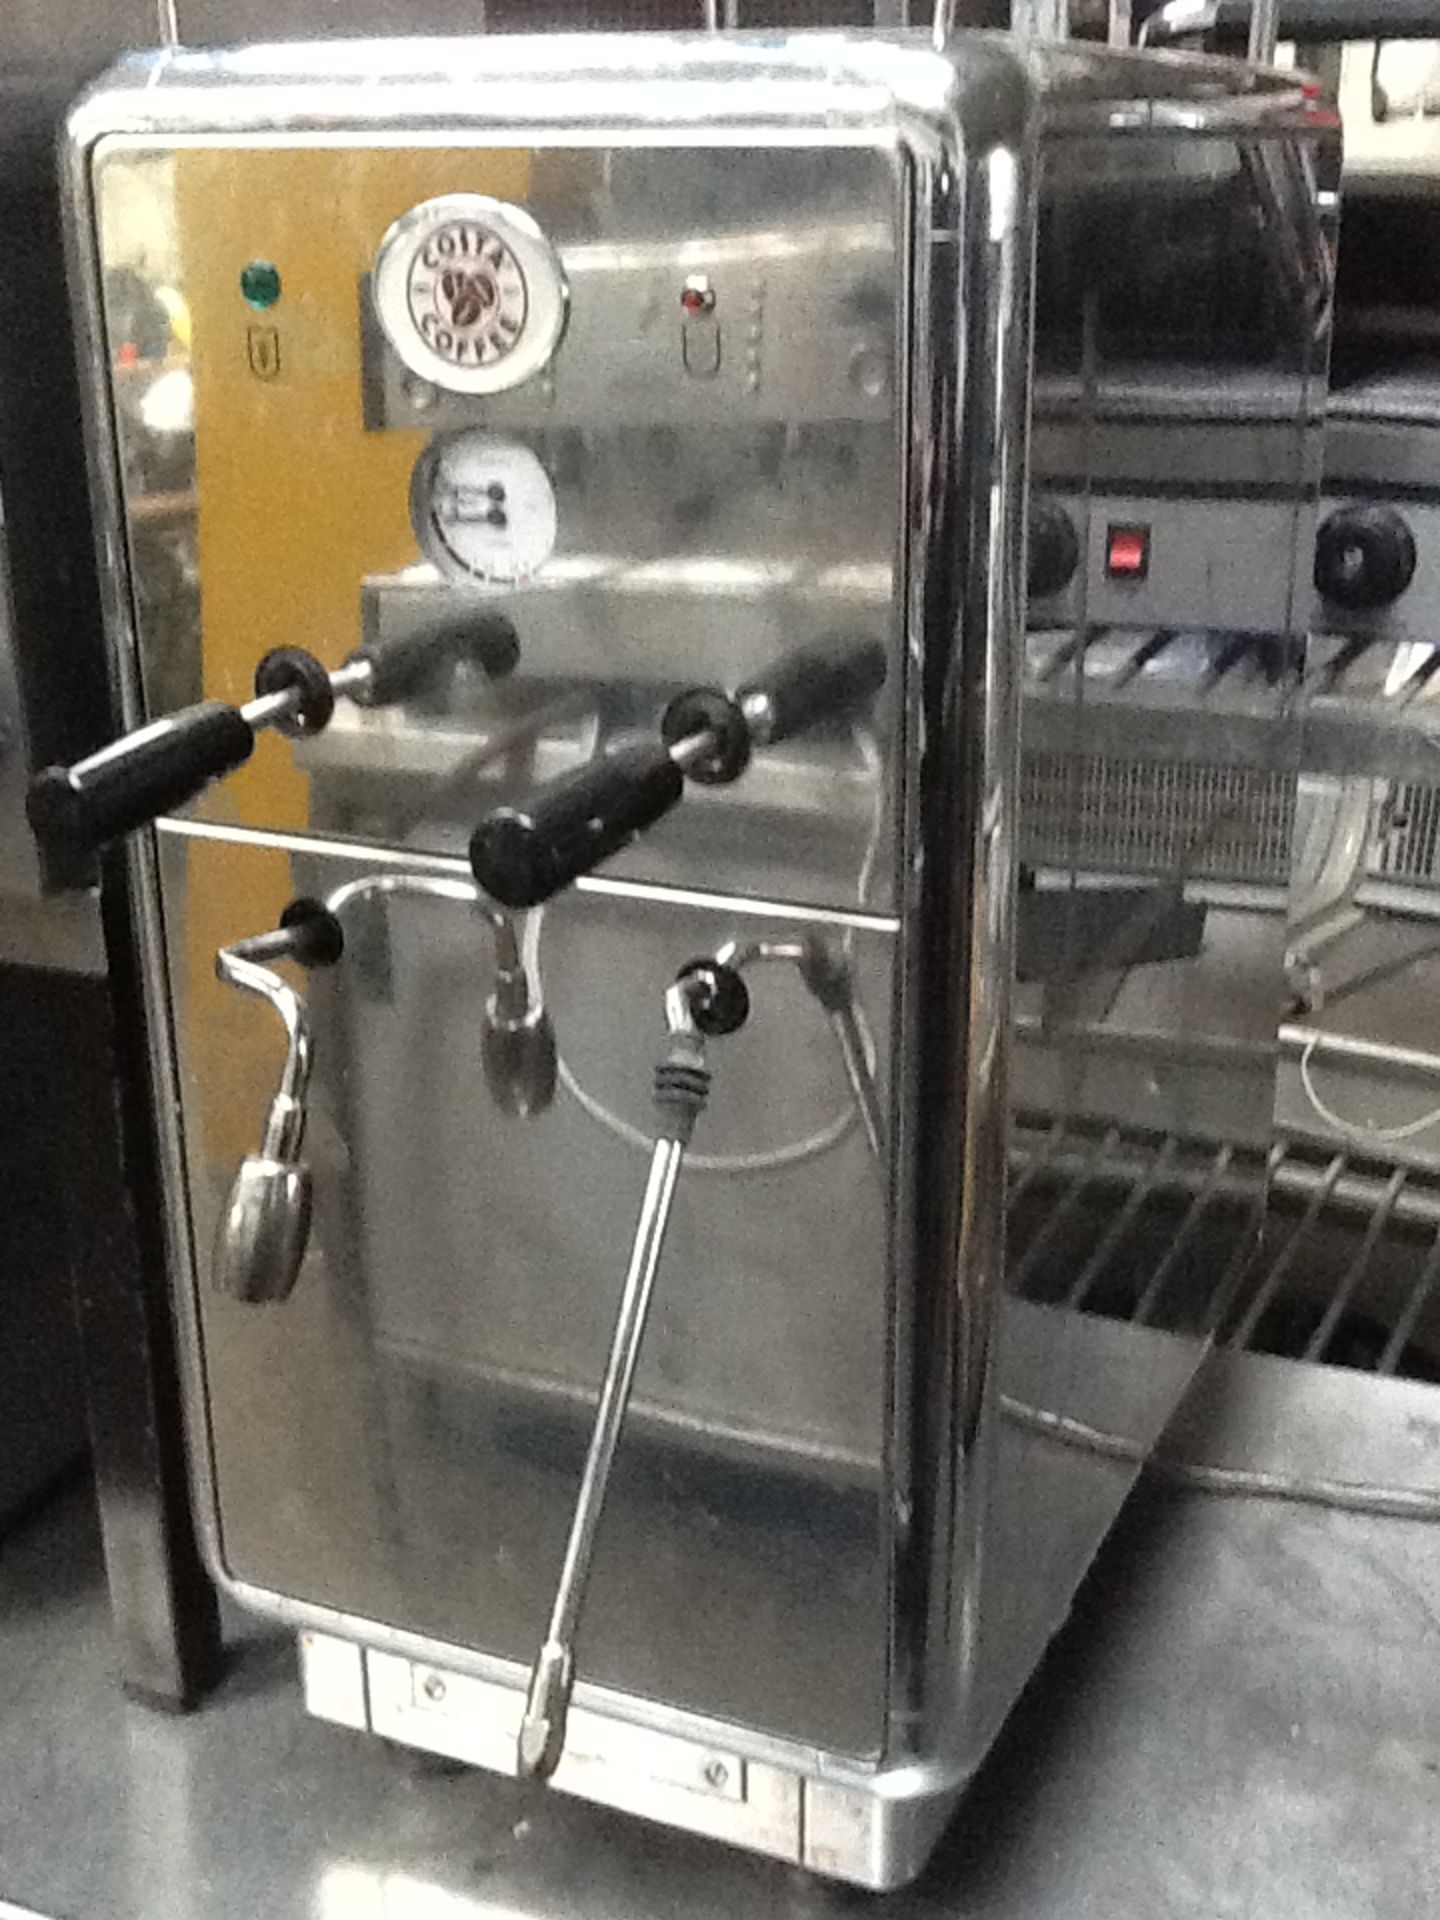 Water Boiler Coffee Machine with Steamer - excellent  condition - tested